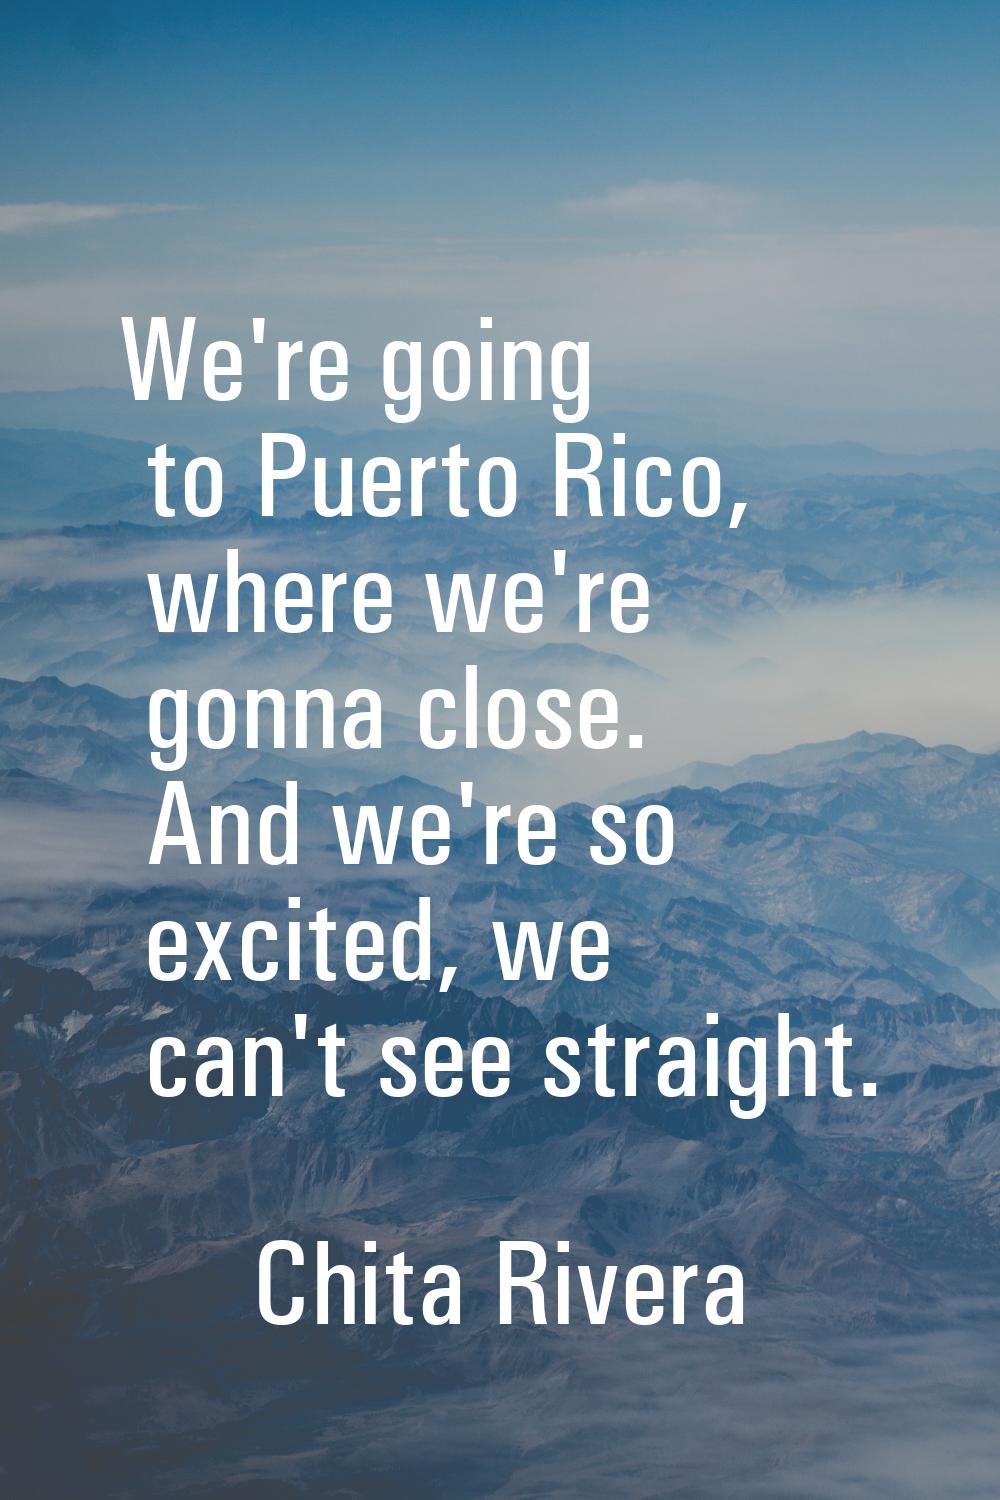 We're going to Puerto Rico, where we're gonna close. And we're so excited, we can't see straight.